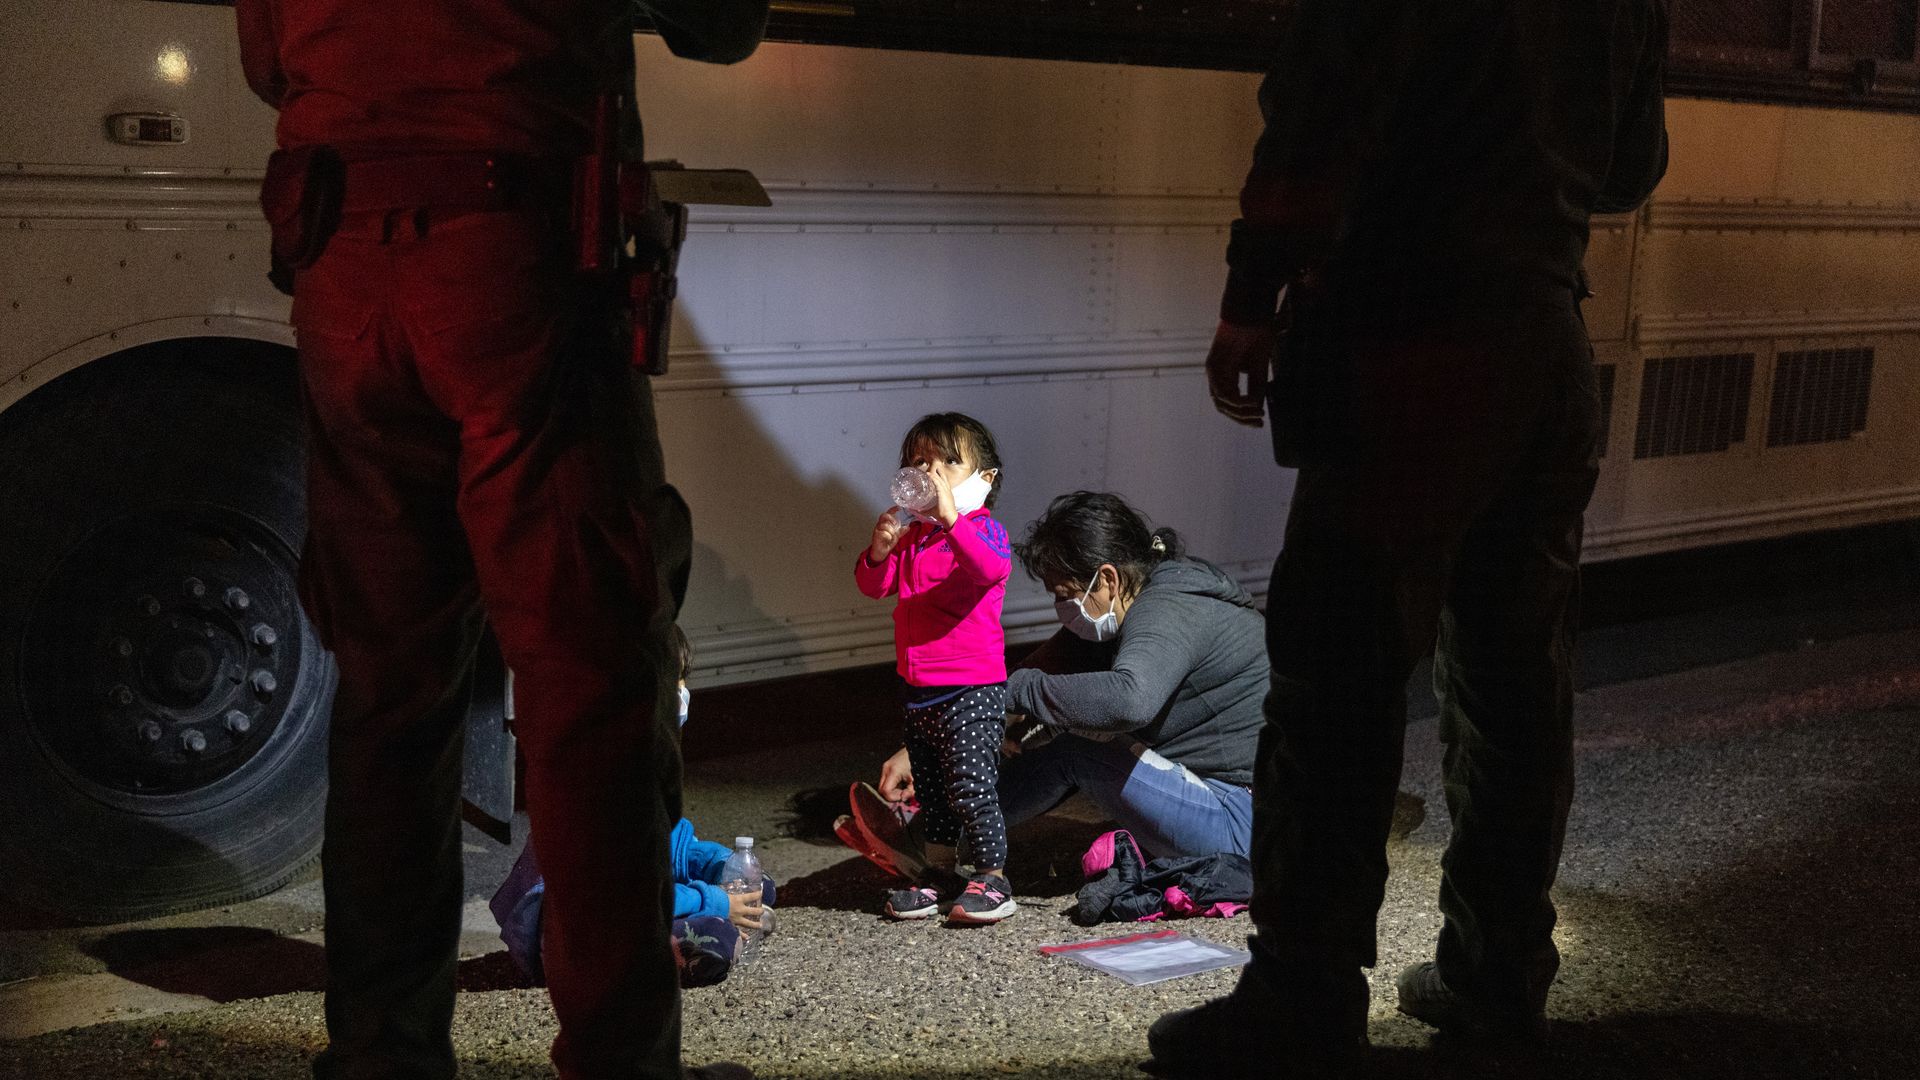 Picture of a migrant child standing in front of border patrol officers.